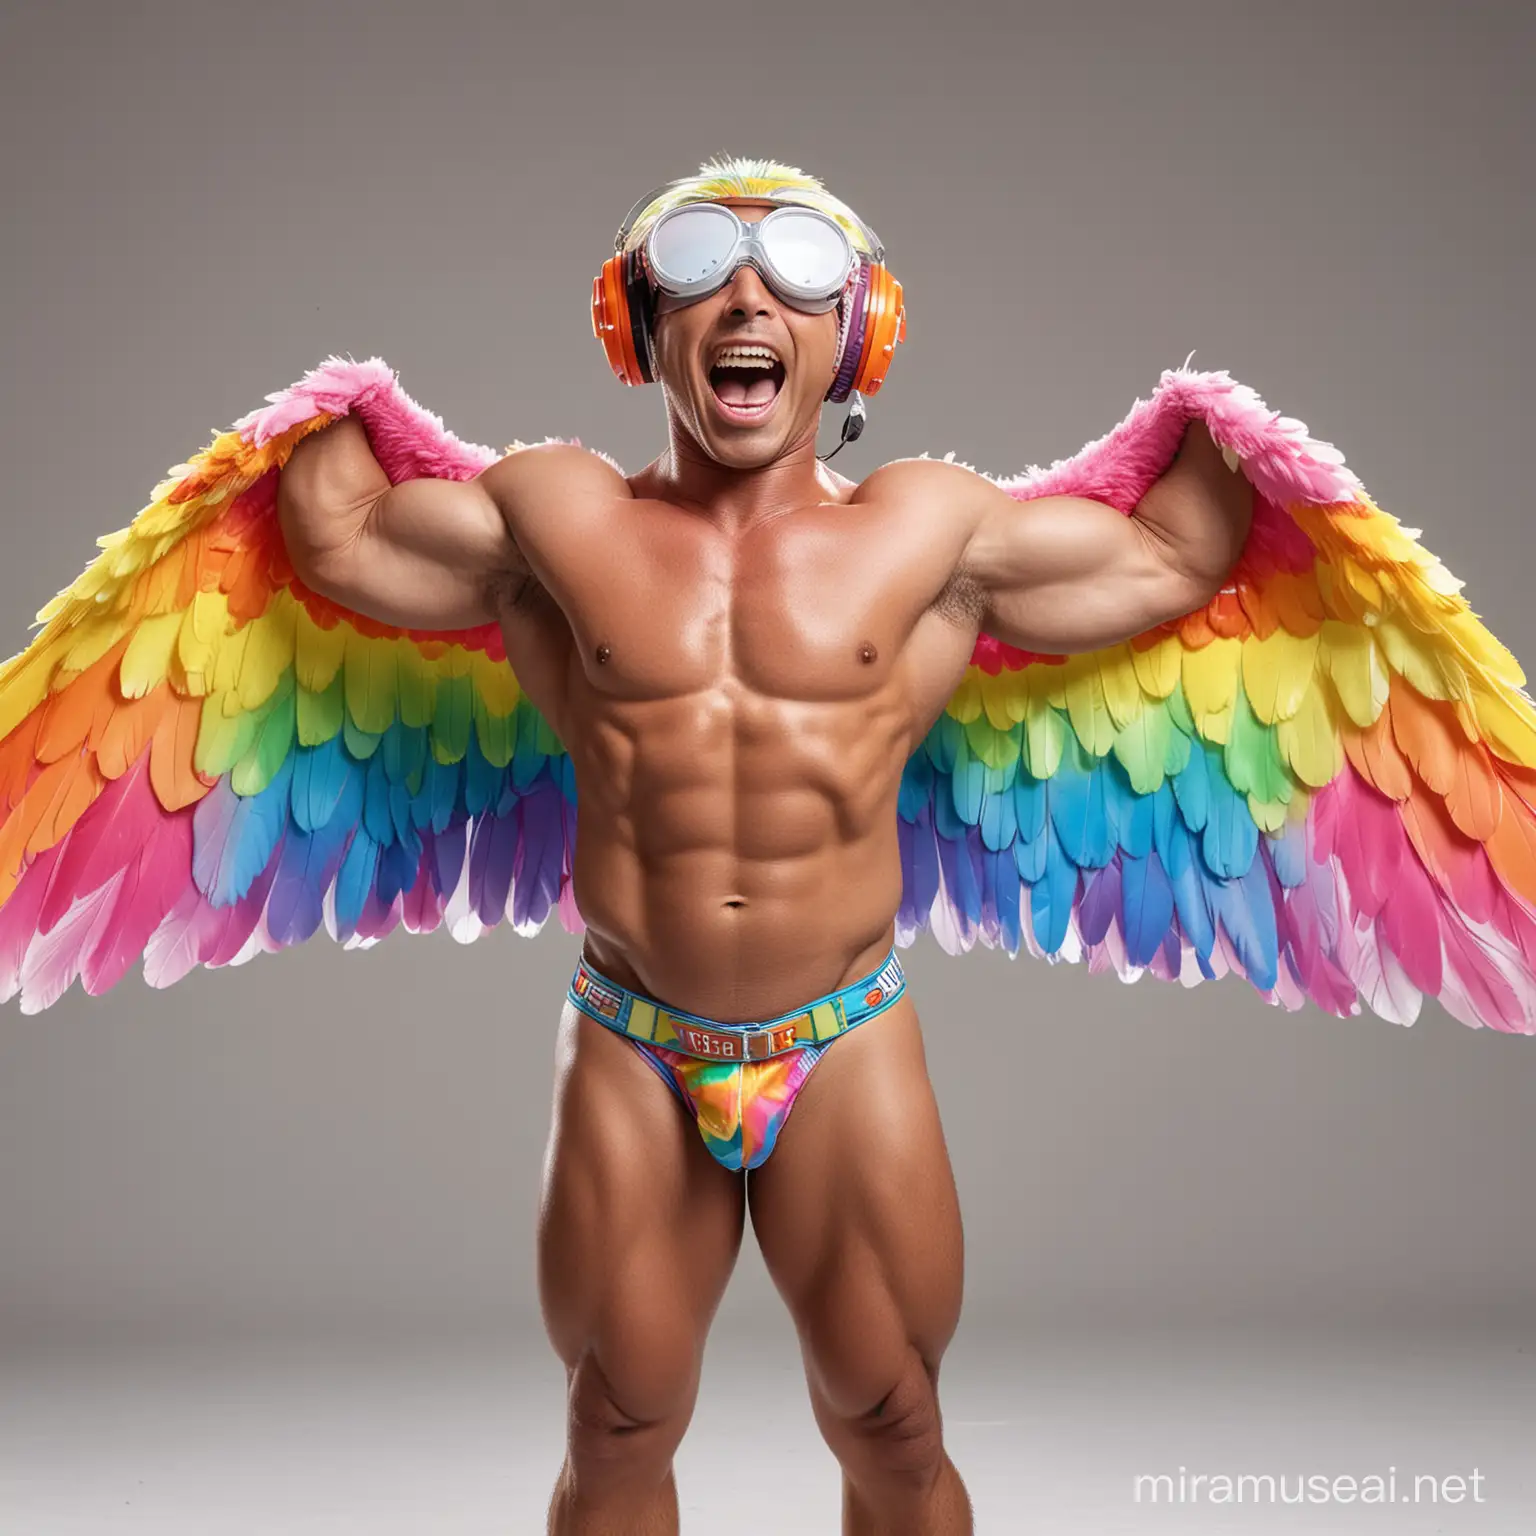 Full Body to feet Capture Topless 40s Ultra Beefy IFBB Bodybuilder Man Wearing Multi-Highlighter Bright Rainbow Coloured See Through Eagle Wings Shoulder Jacket Short shorts Arms Up Flexing Big Strong Arm with Doraemon Goggle